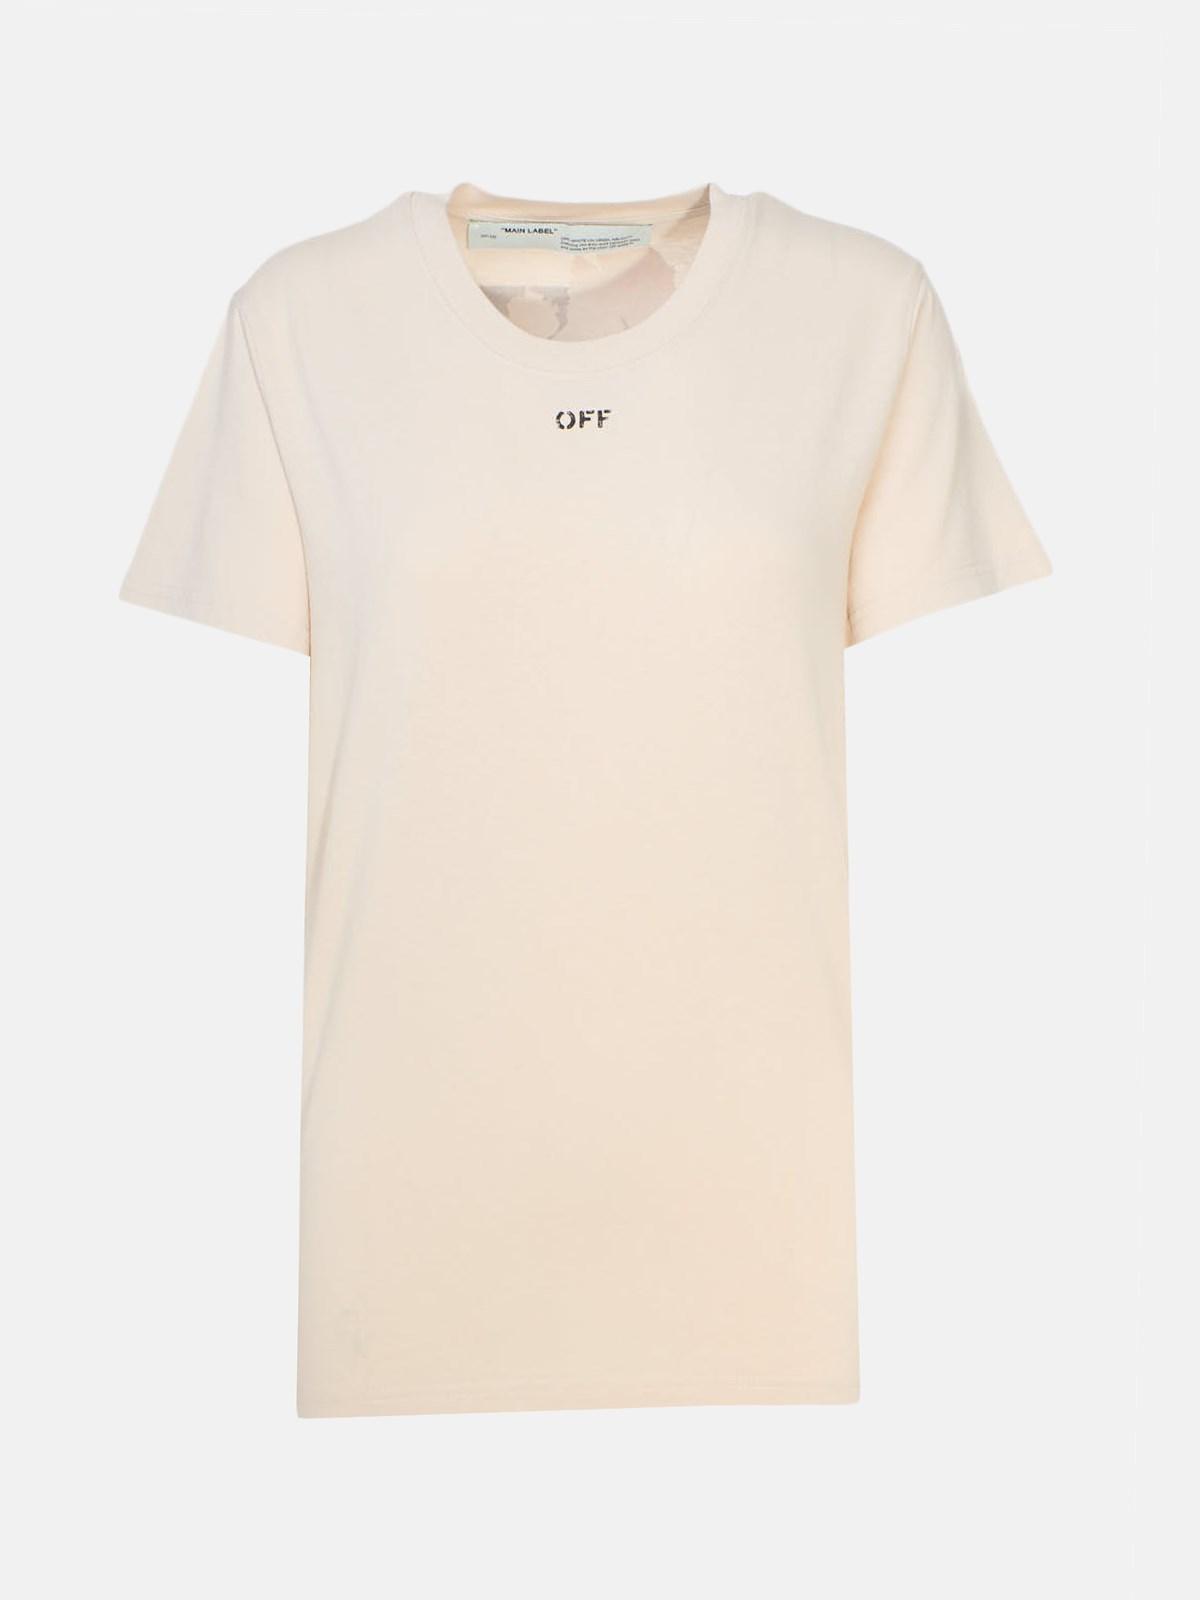 Off-White c/o Virgil Abloh Cream Carryover Flowers T-shirt in Natural